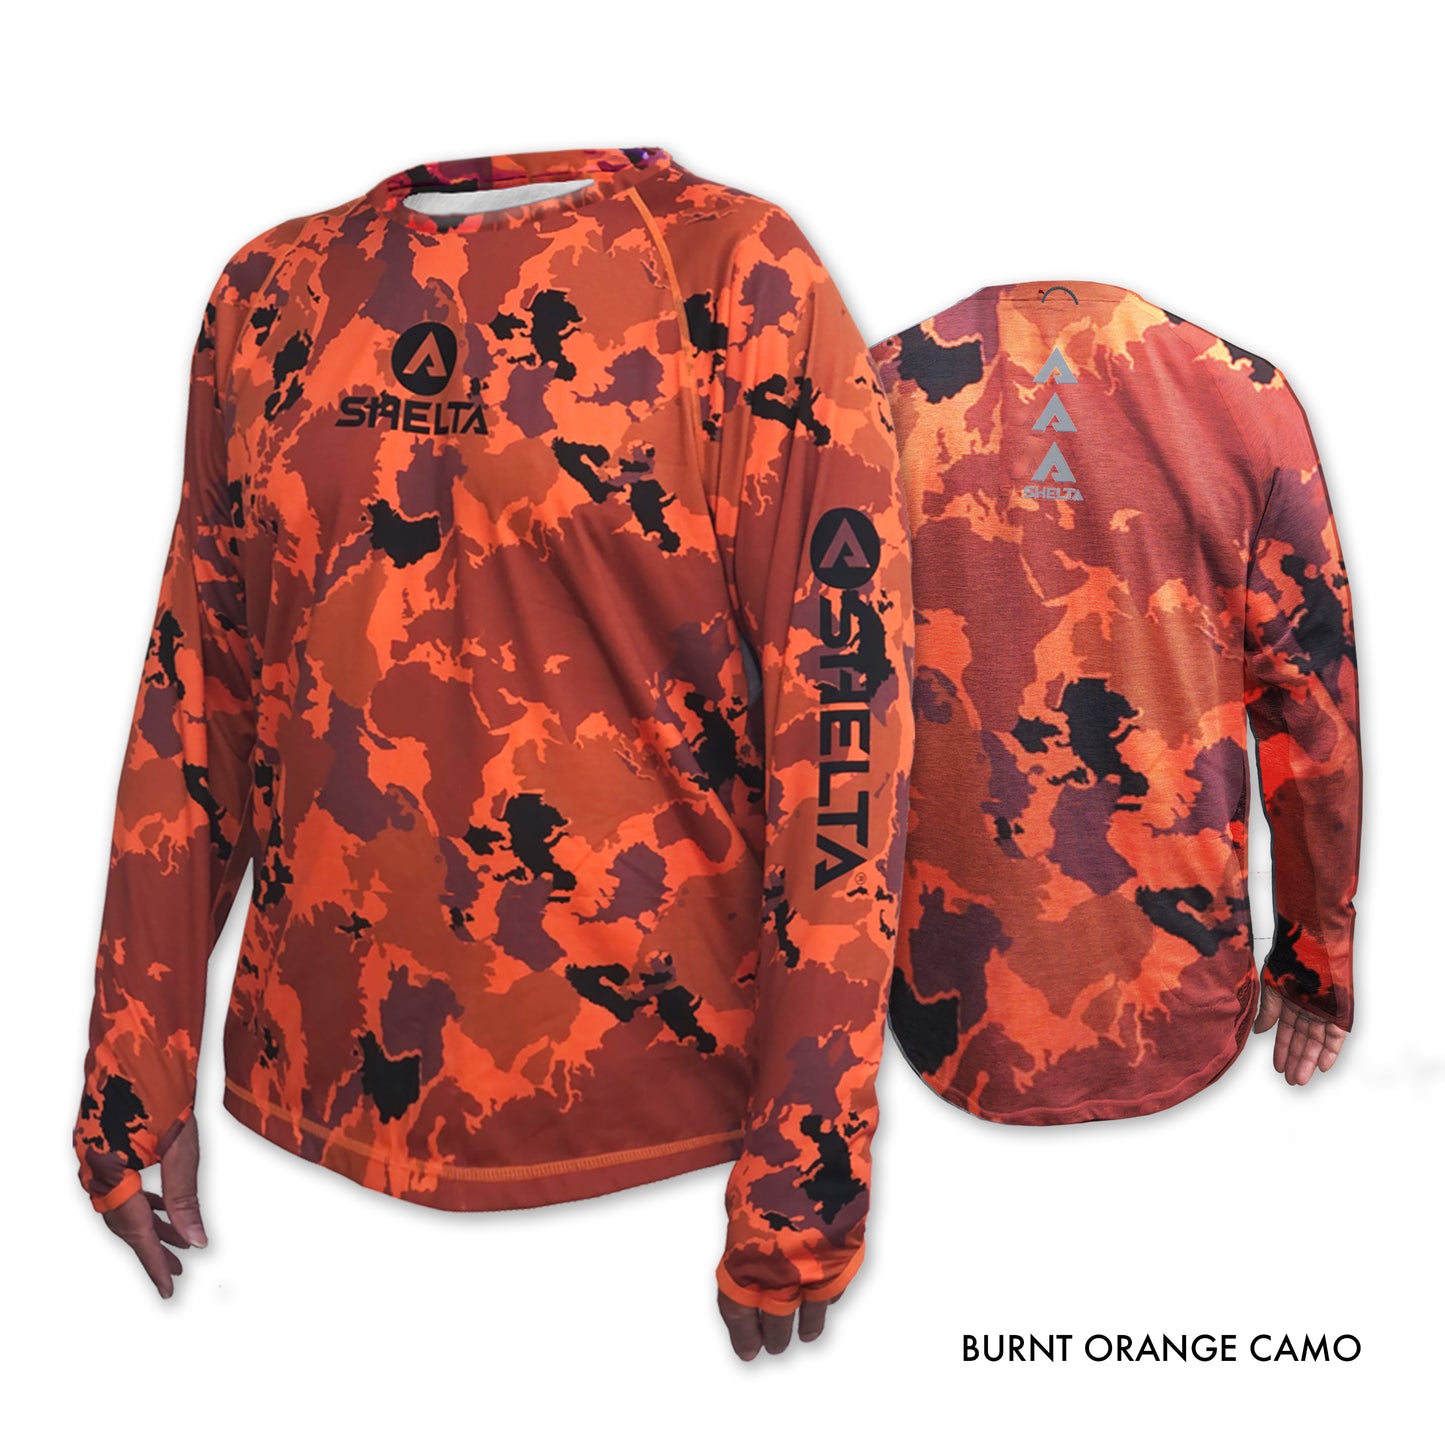 The Aquaterra Crew neck in Burnt Orange Camo is engineered & built with sun protection, function, and durability in mind.  Truly amphibious these technical tops work as well in the water as on land.  Offering features consistent with Shelta core values and innovation goals.   UPF 50+ UV protection, the highest rating given.  Blocks 98% of UVA/UVB radiation.